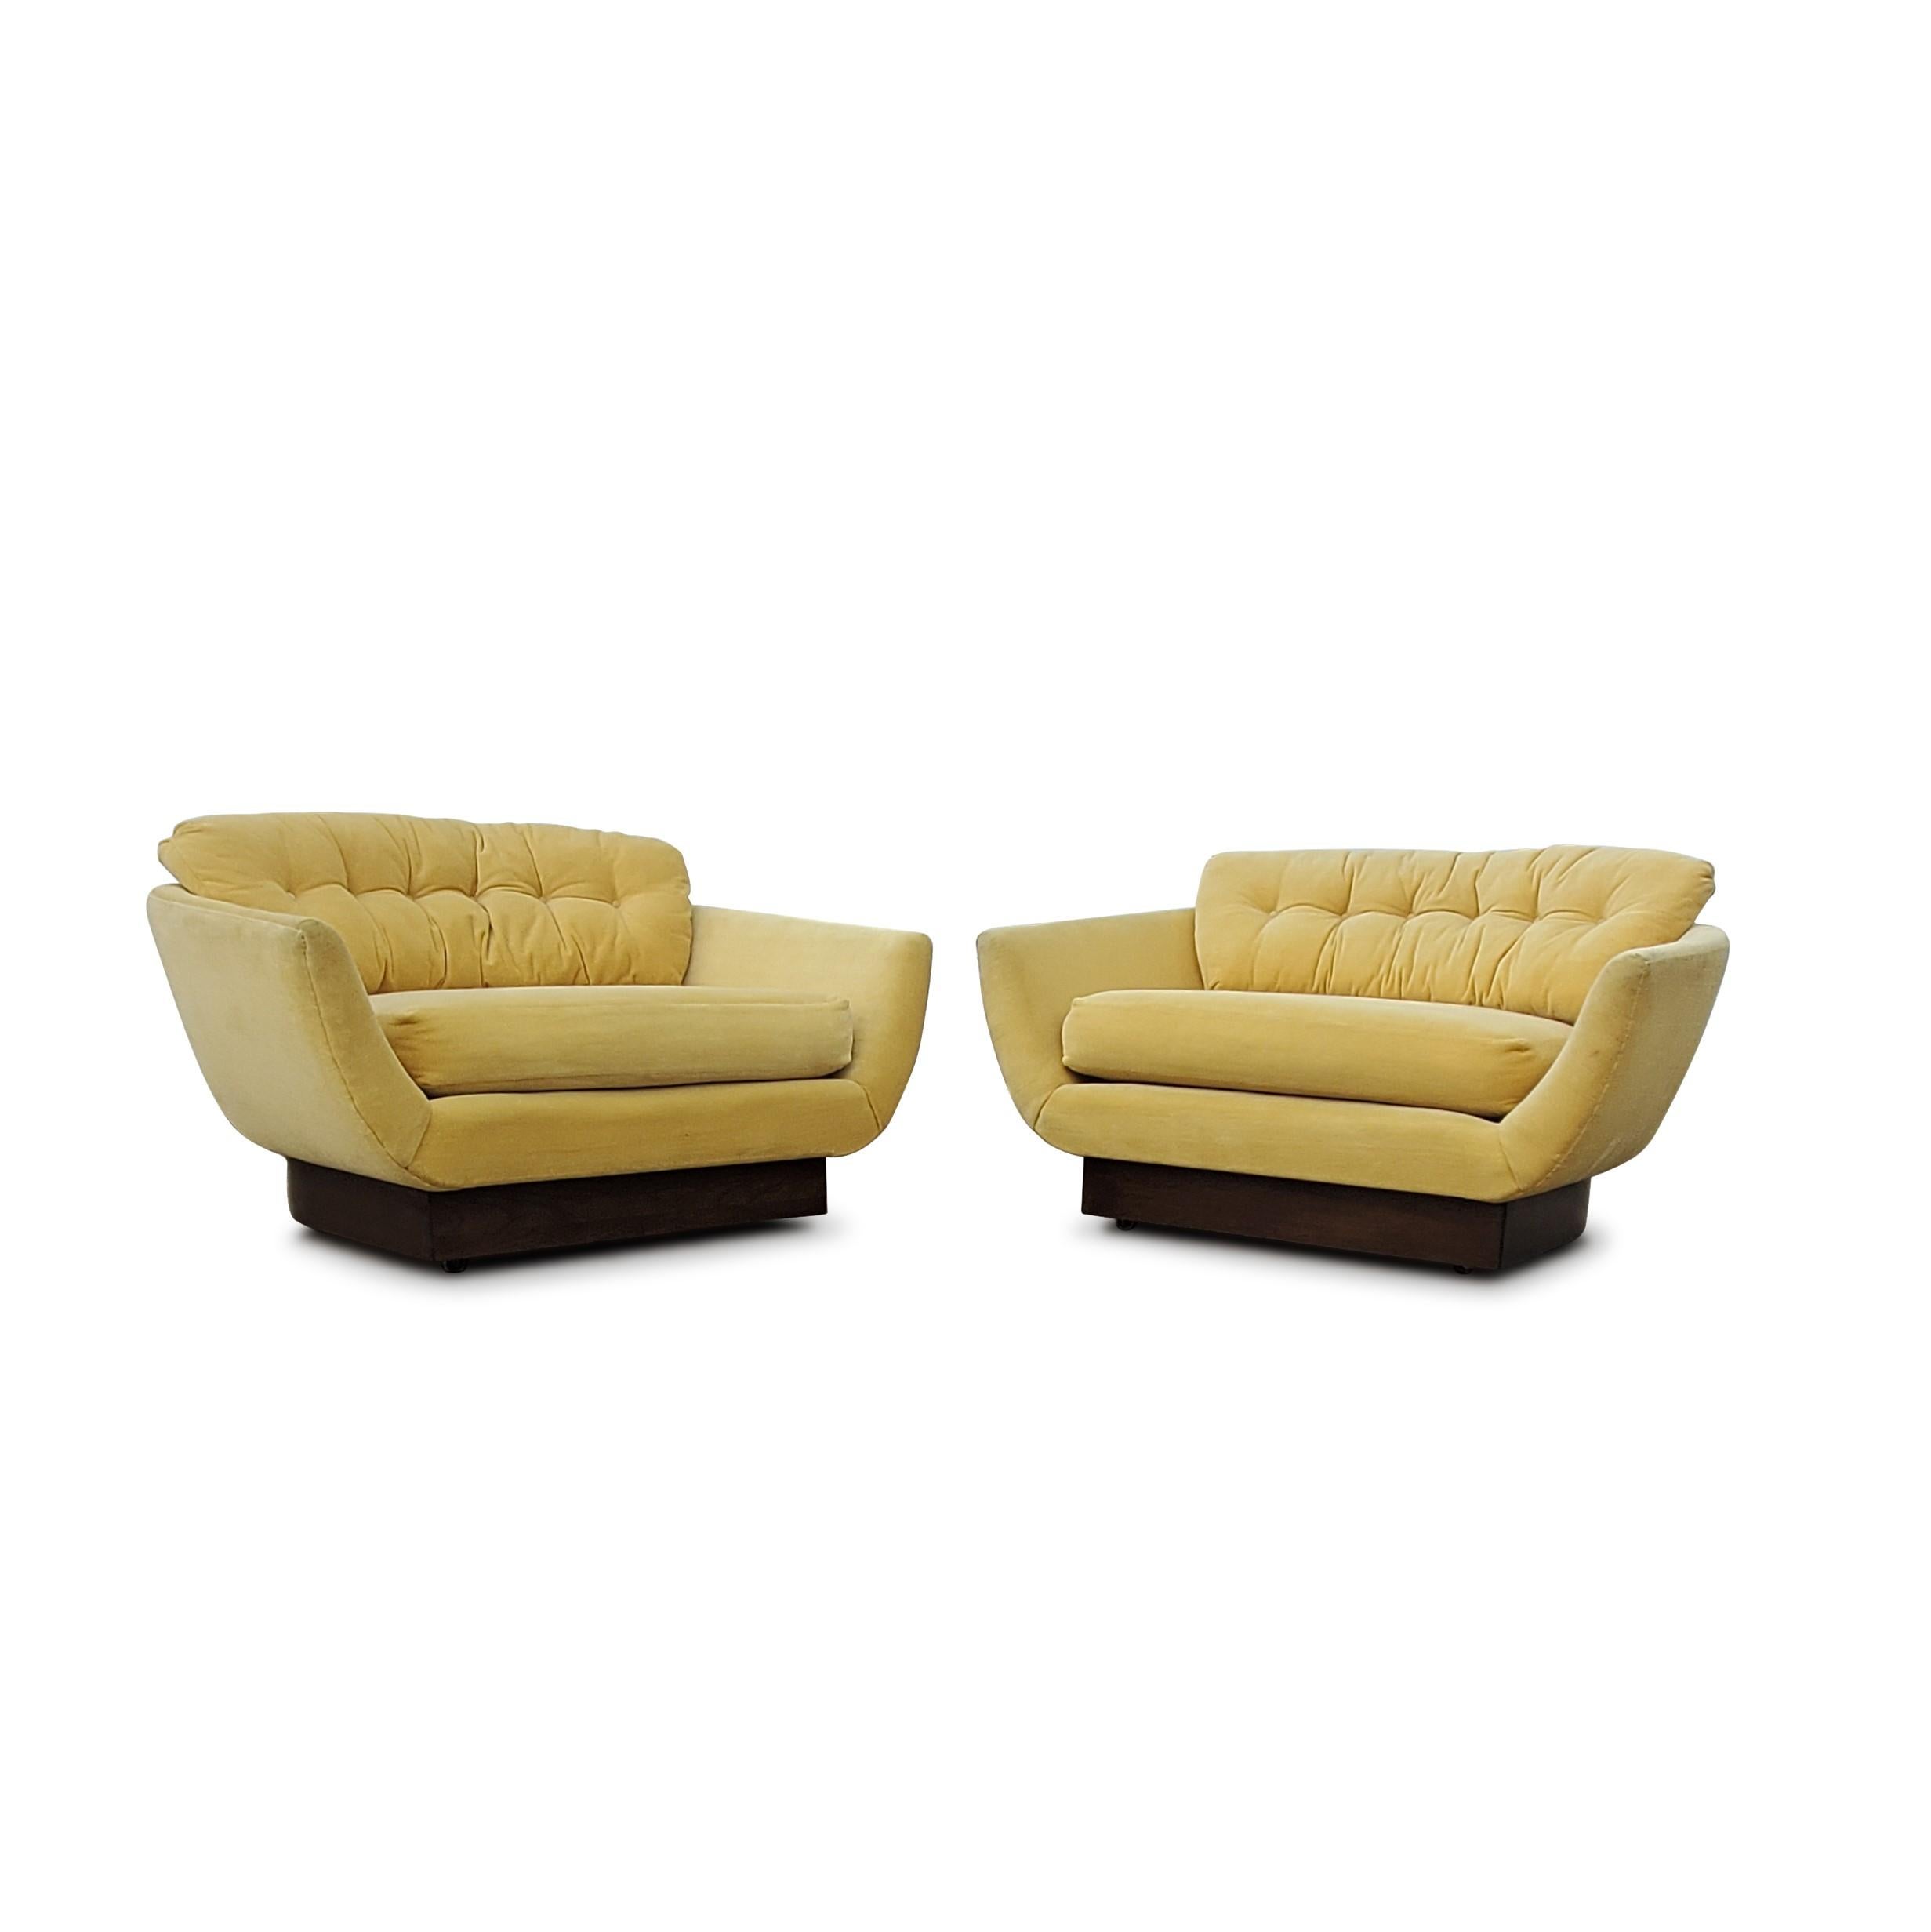 Pair of oversized Adrian Pearsall lounge chairs.